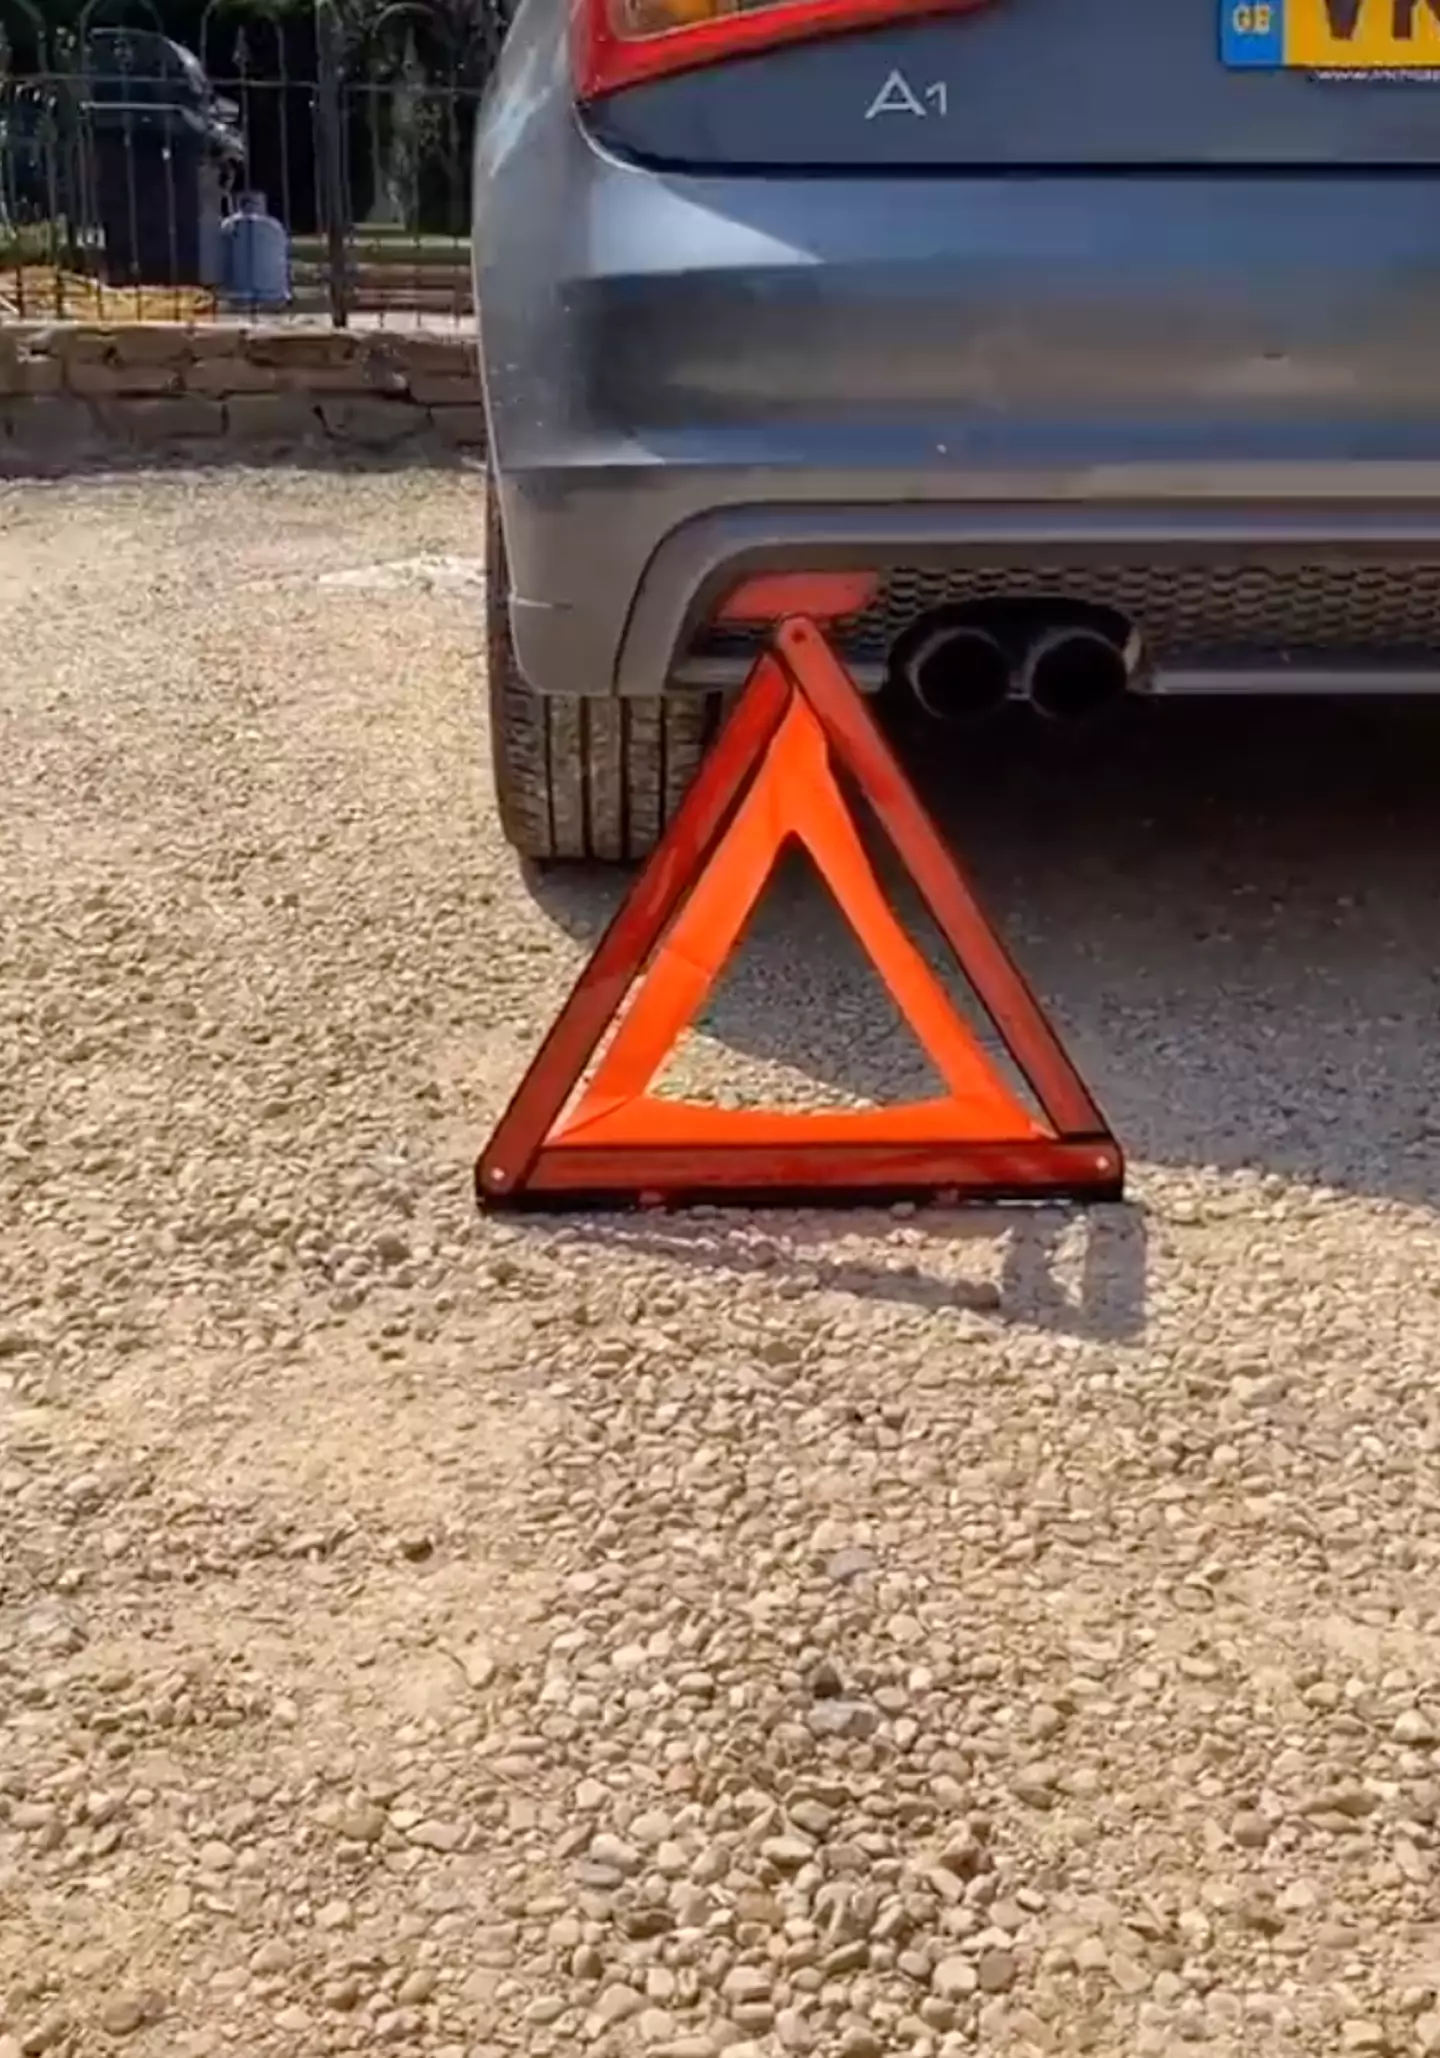 The warning triangle is really important if you break down.